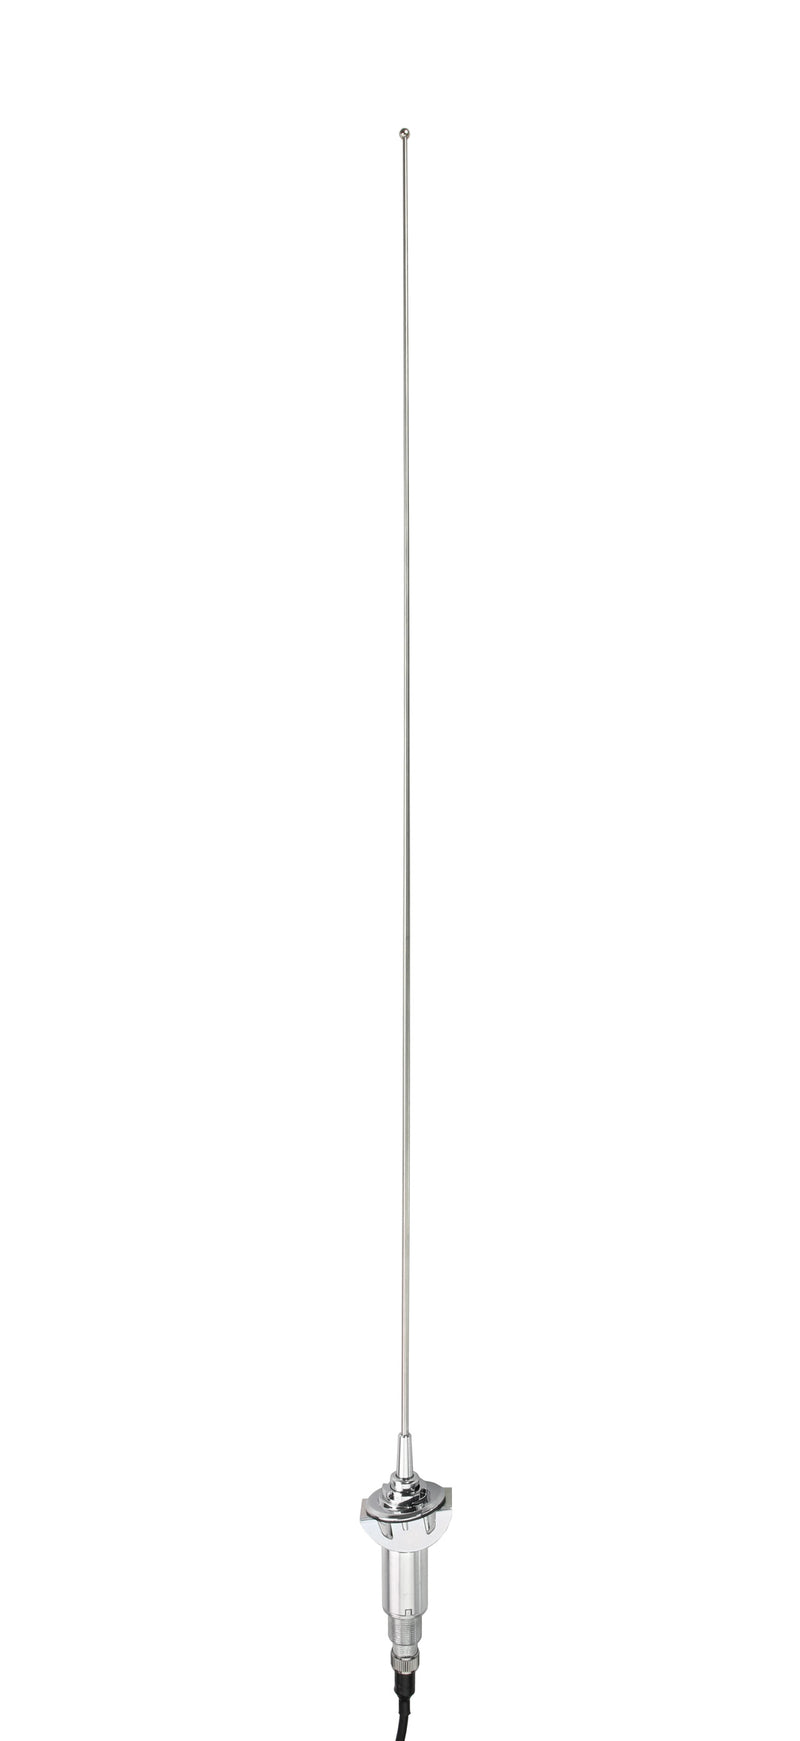 1968-74 Plymouth Valiant Replacement Antenna